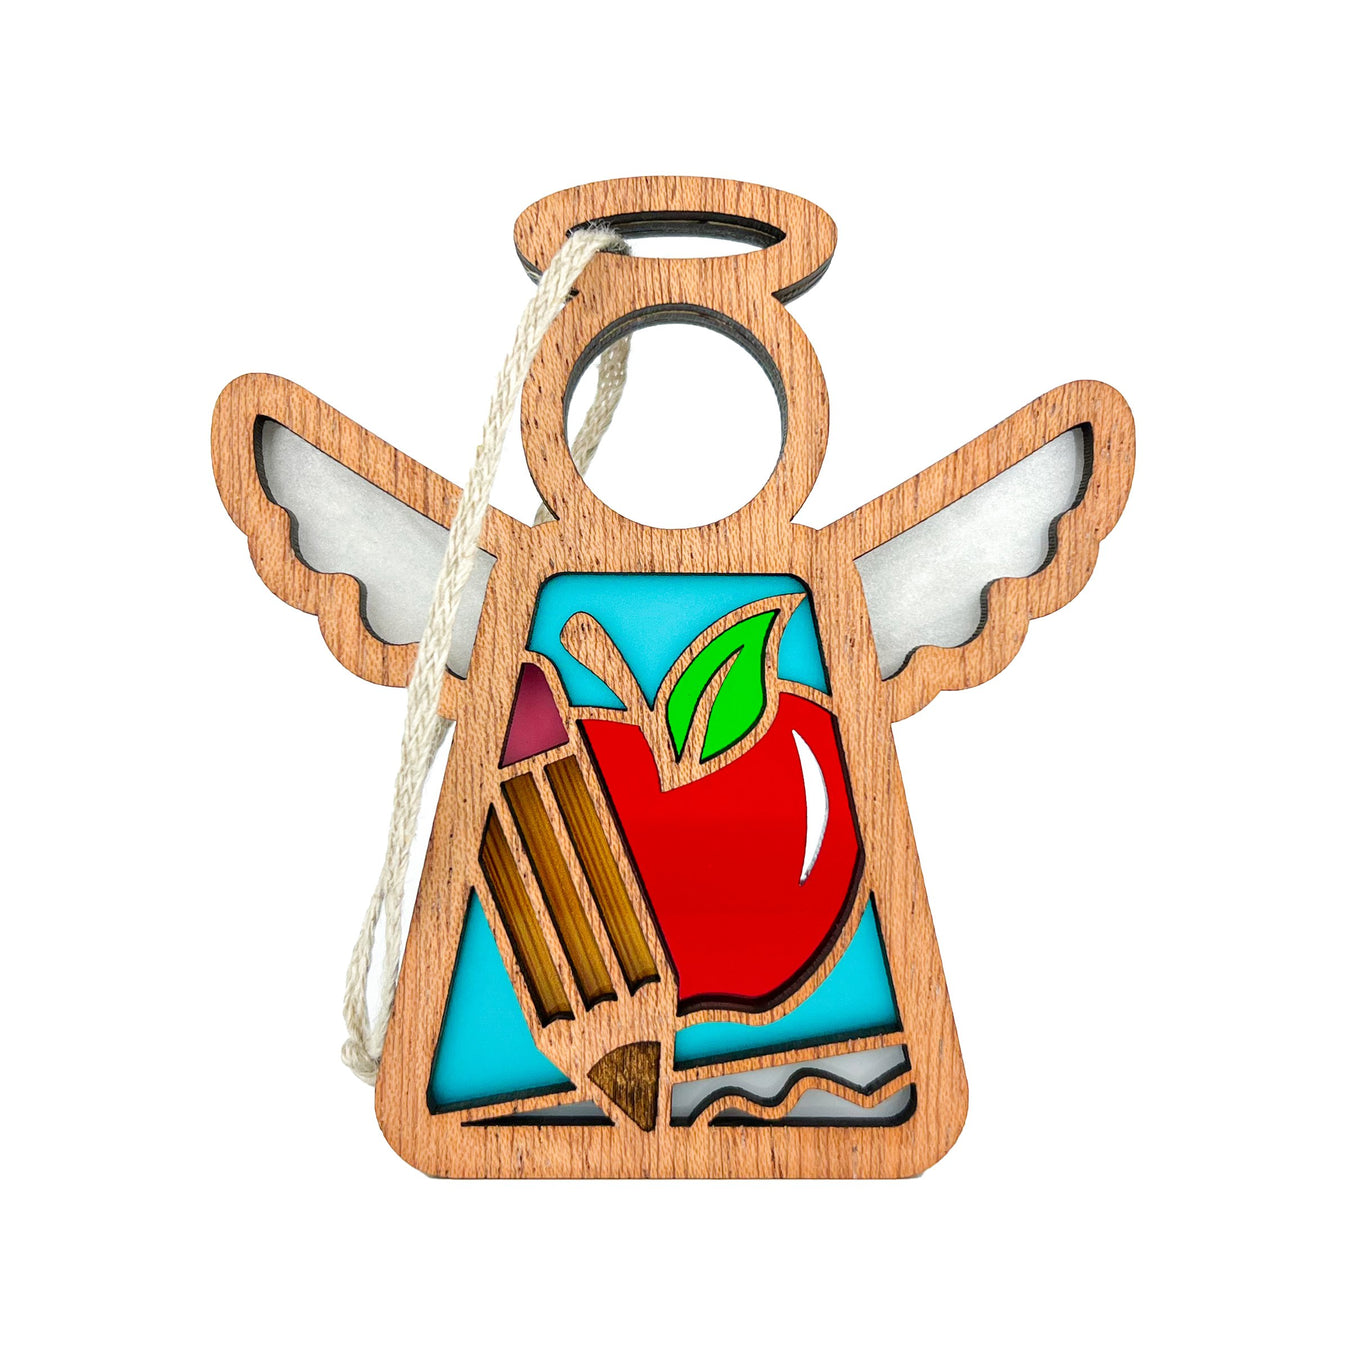 A Mother’s Angels® teacher ornament featuring a red apple, pencil and paper, ideal for an end of year teacher gift or a teacher Christmas present.